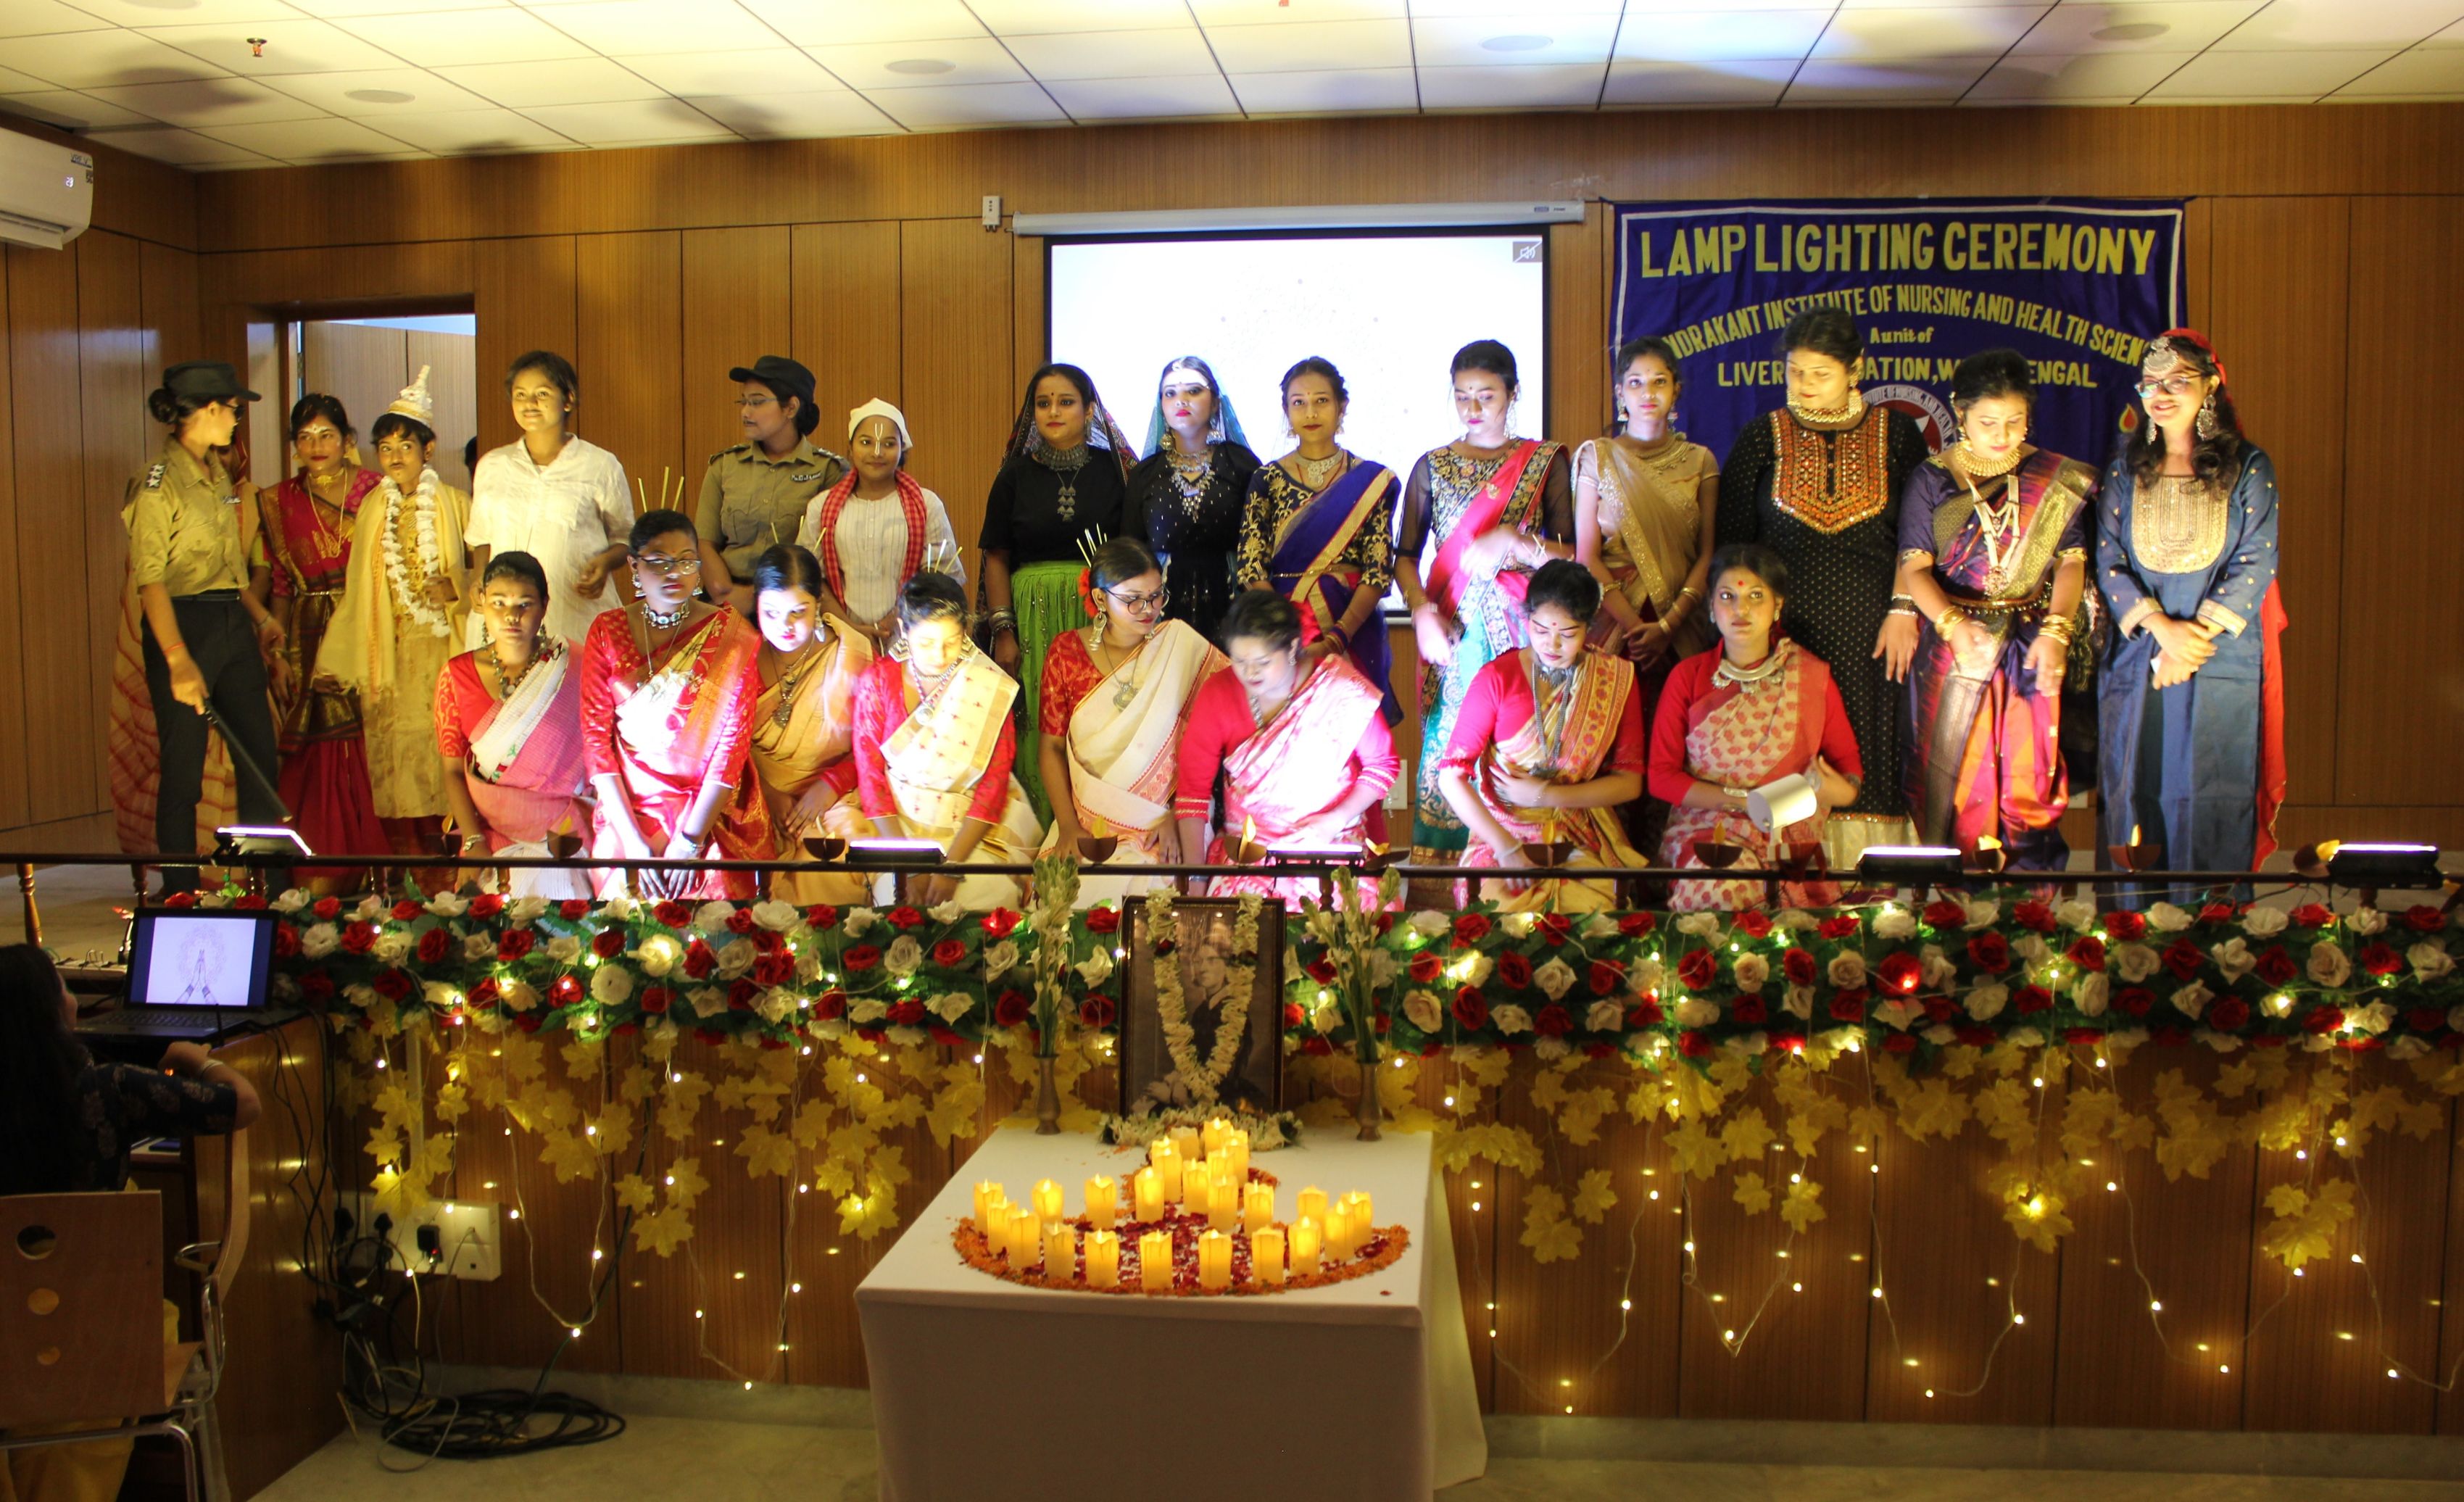 Oath taking on 2nd Lamp Lighting Ceremony